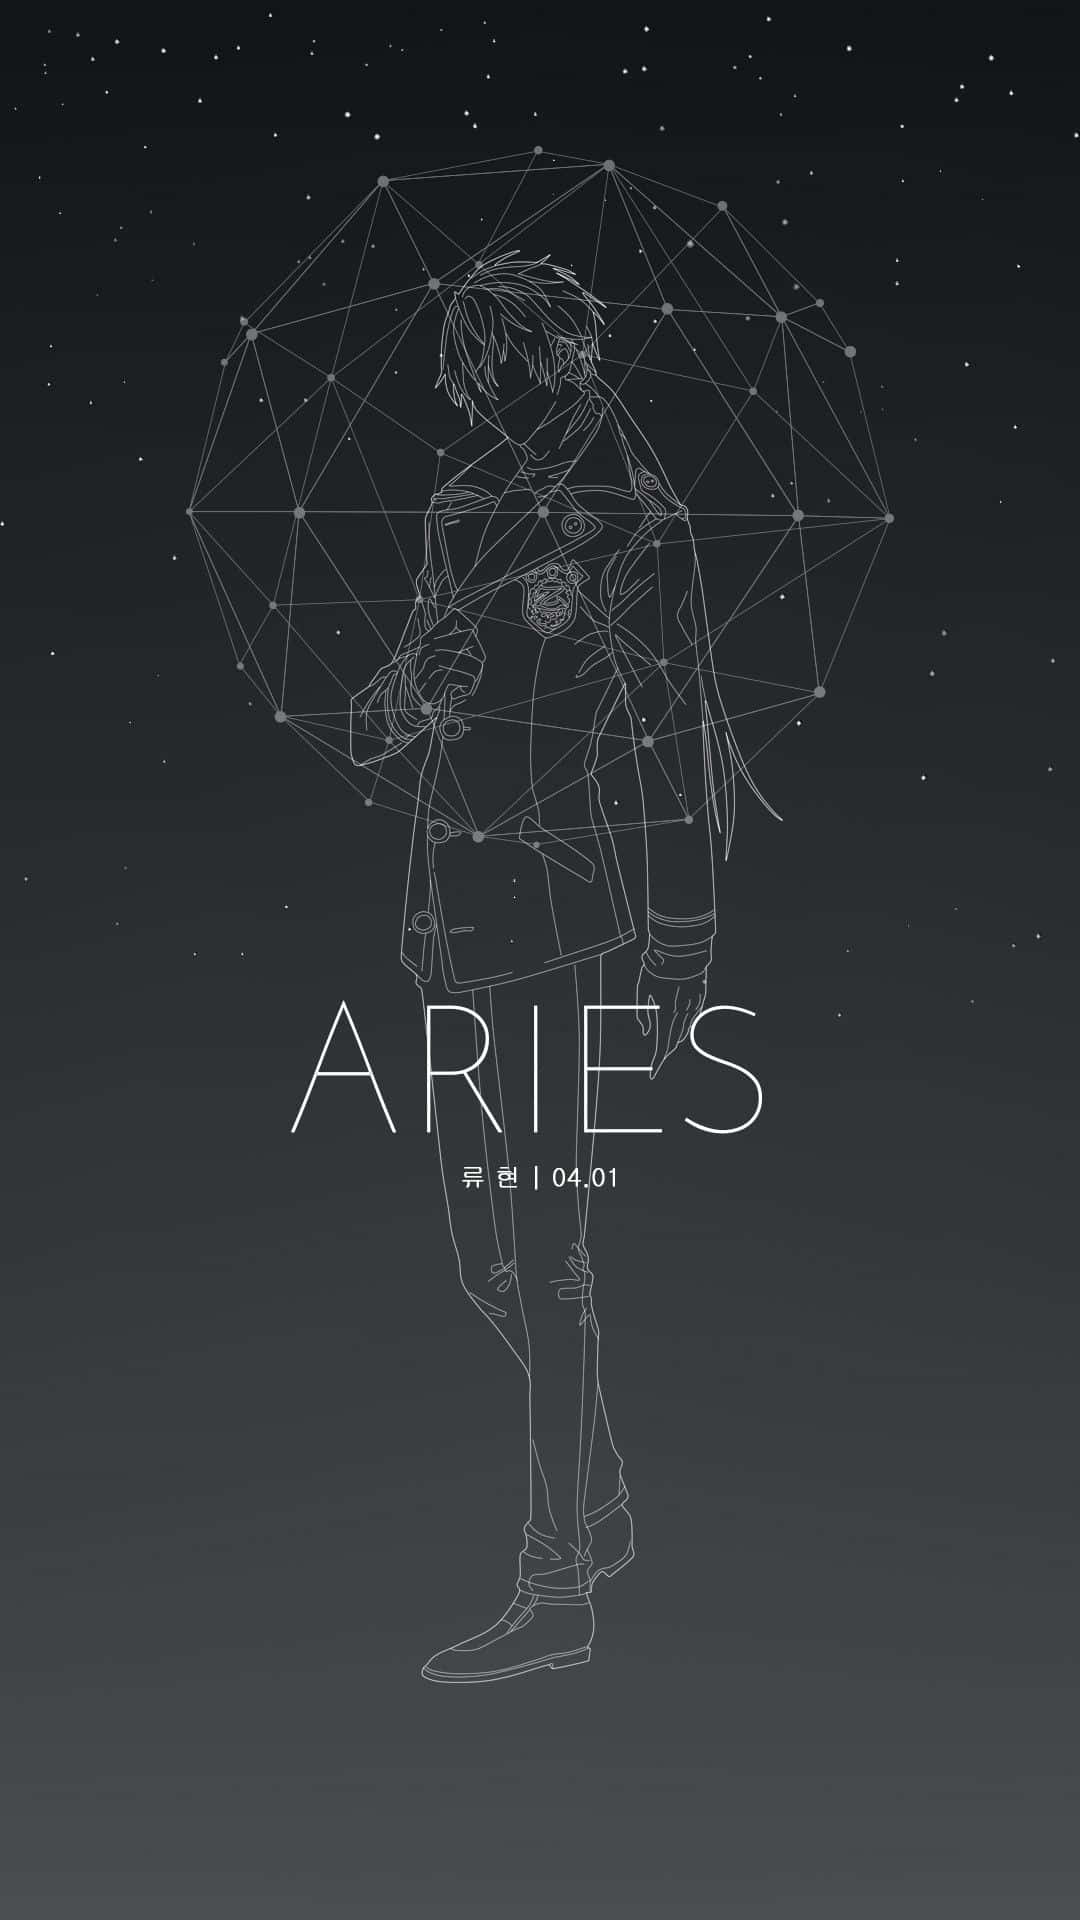 Caption: Expressive Aries Graphic on a Shiny Black iPhone Wallpaper